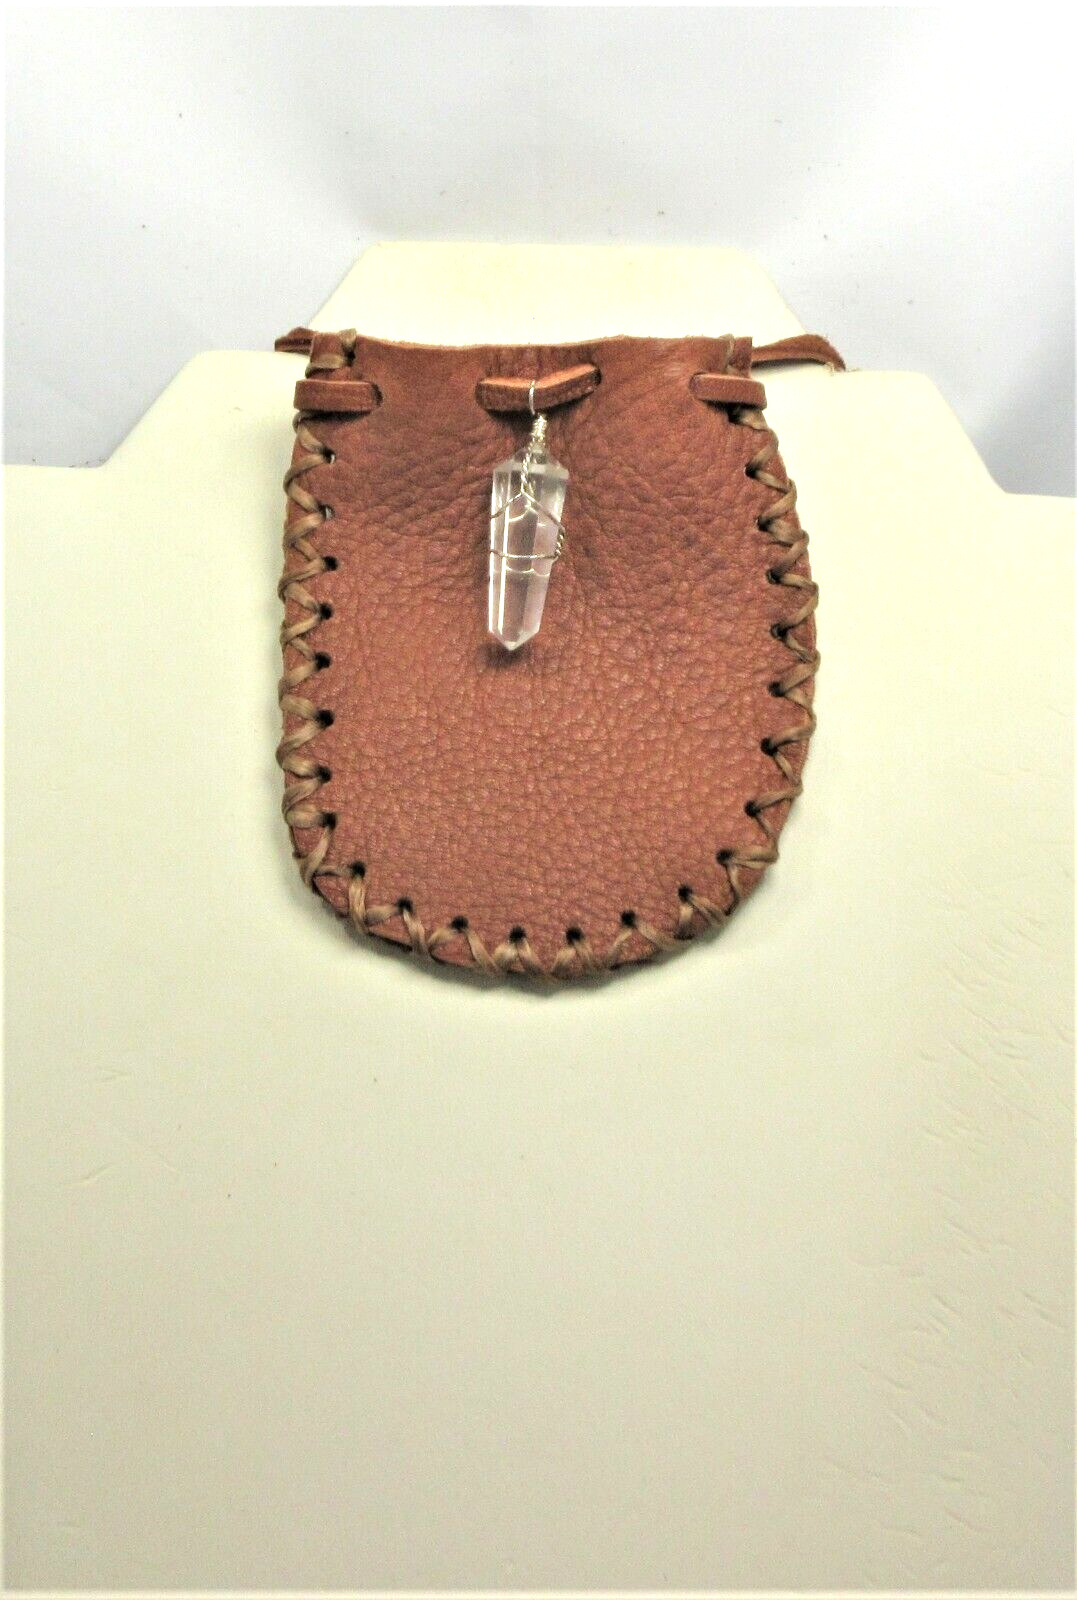 Deerskin Leather Pouch, Quartz Crystal, Hand Made Pouch #762